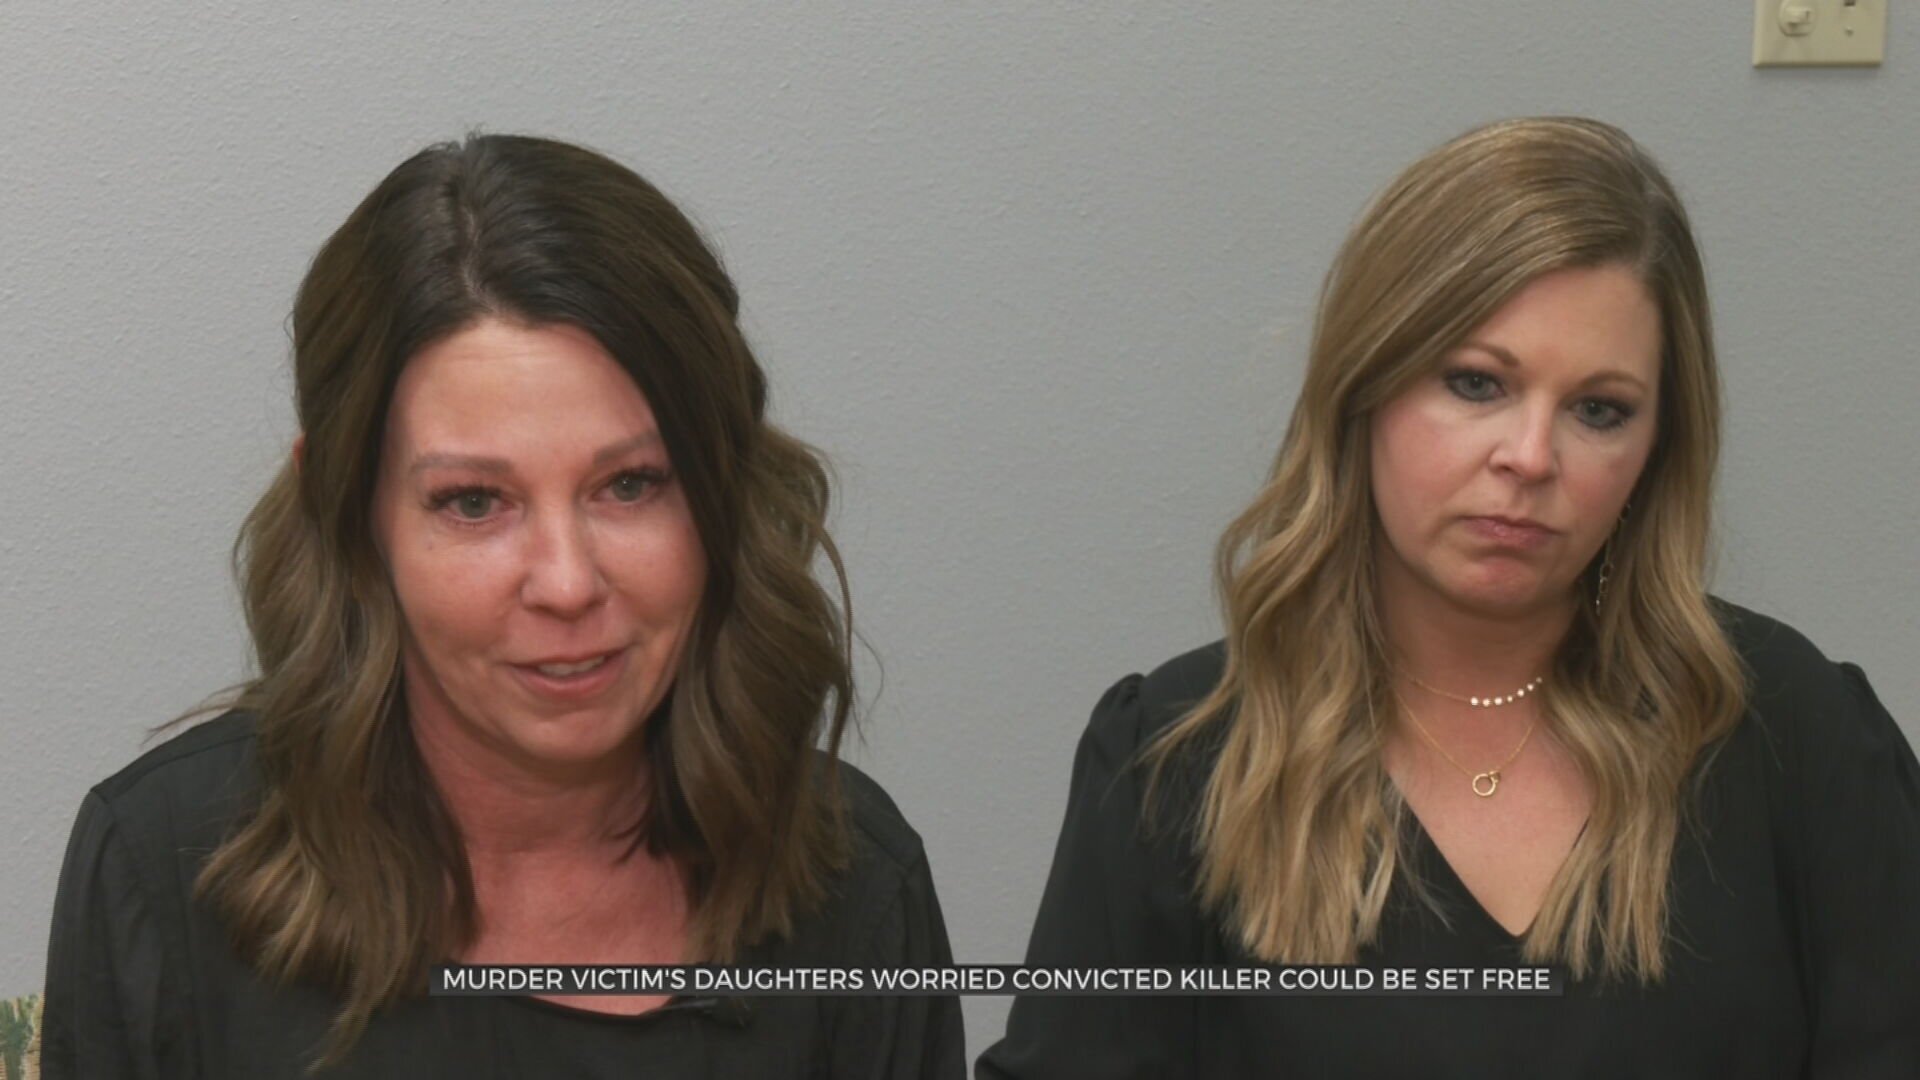 Rogers County Sisters Desperate To Keep Their Mother’s Convicted Killer Behind Bars 